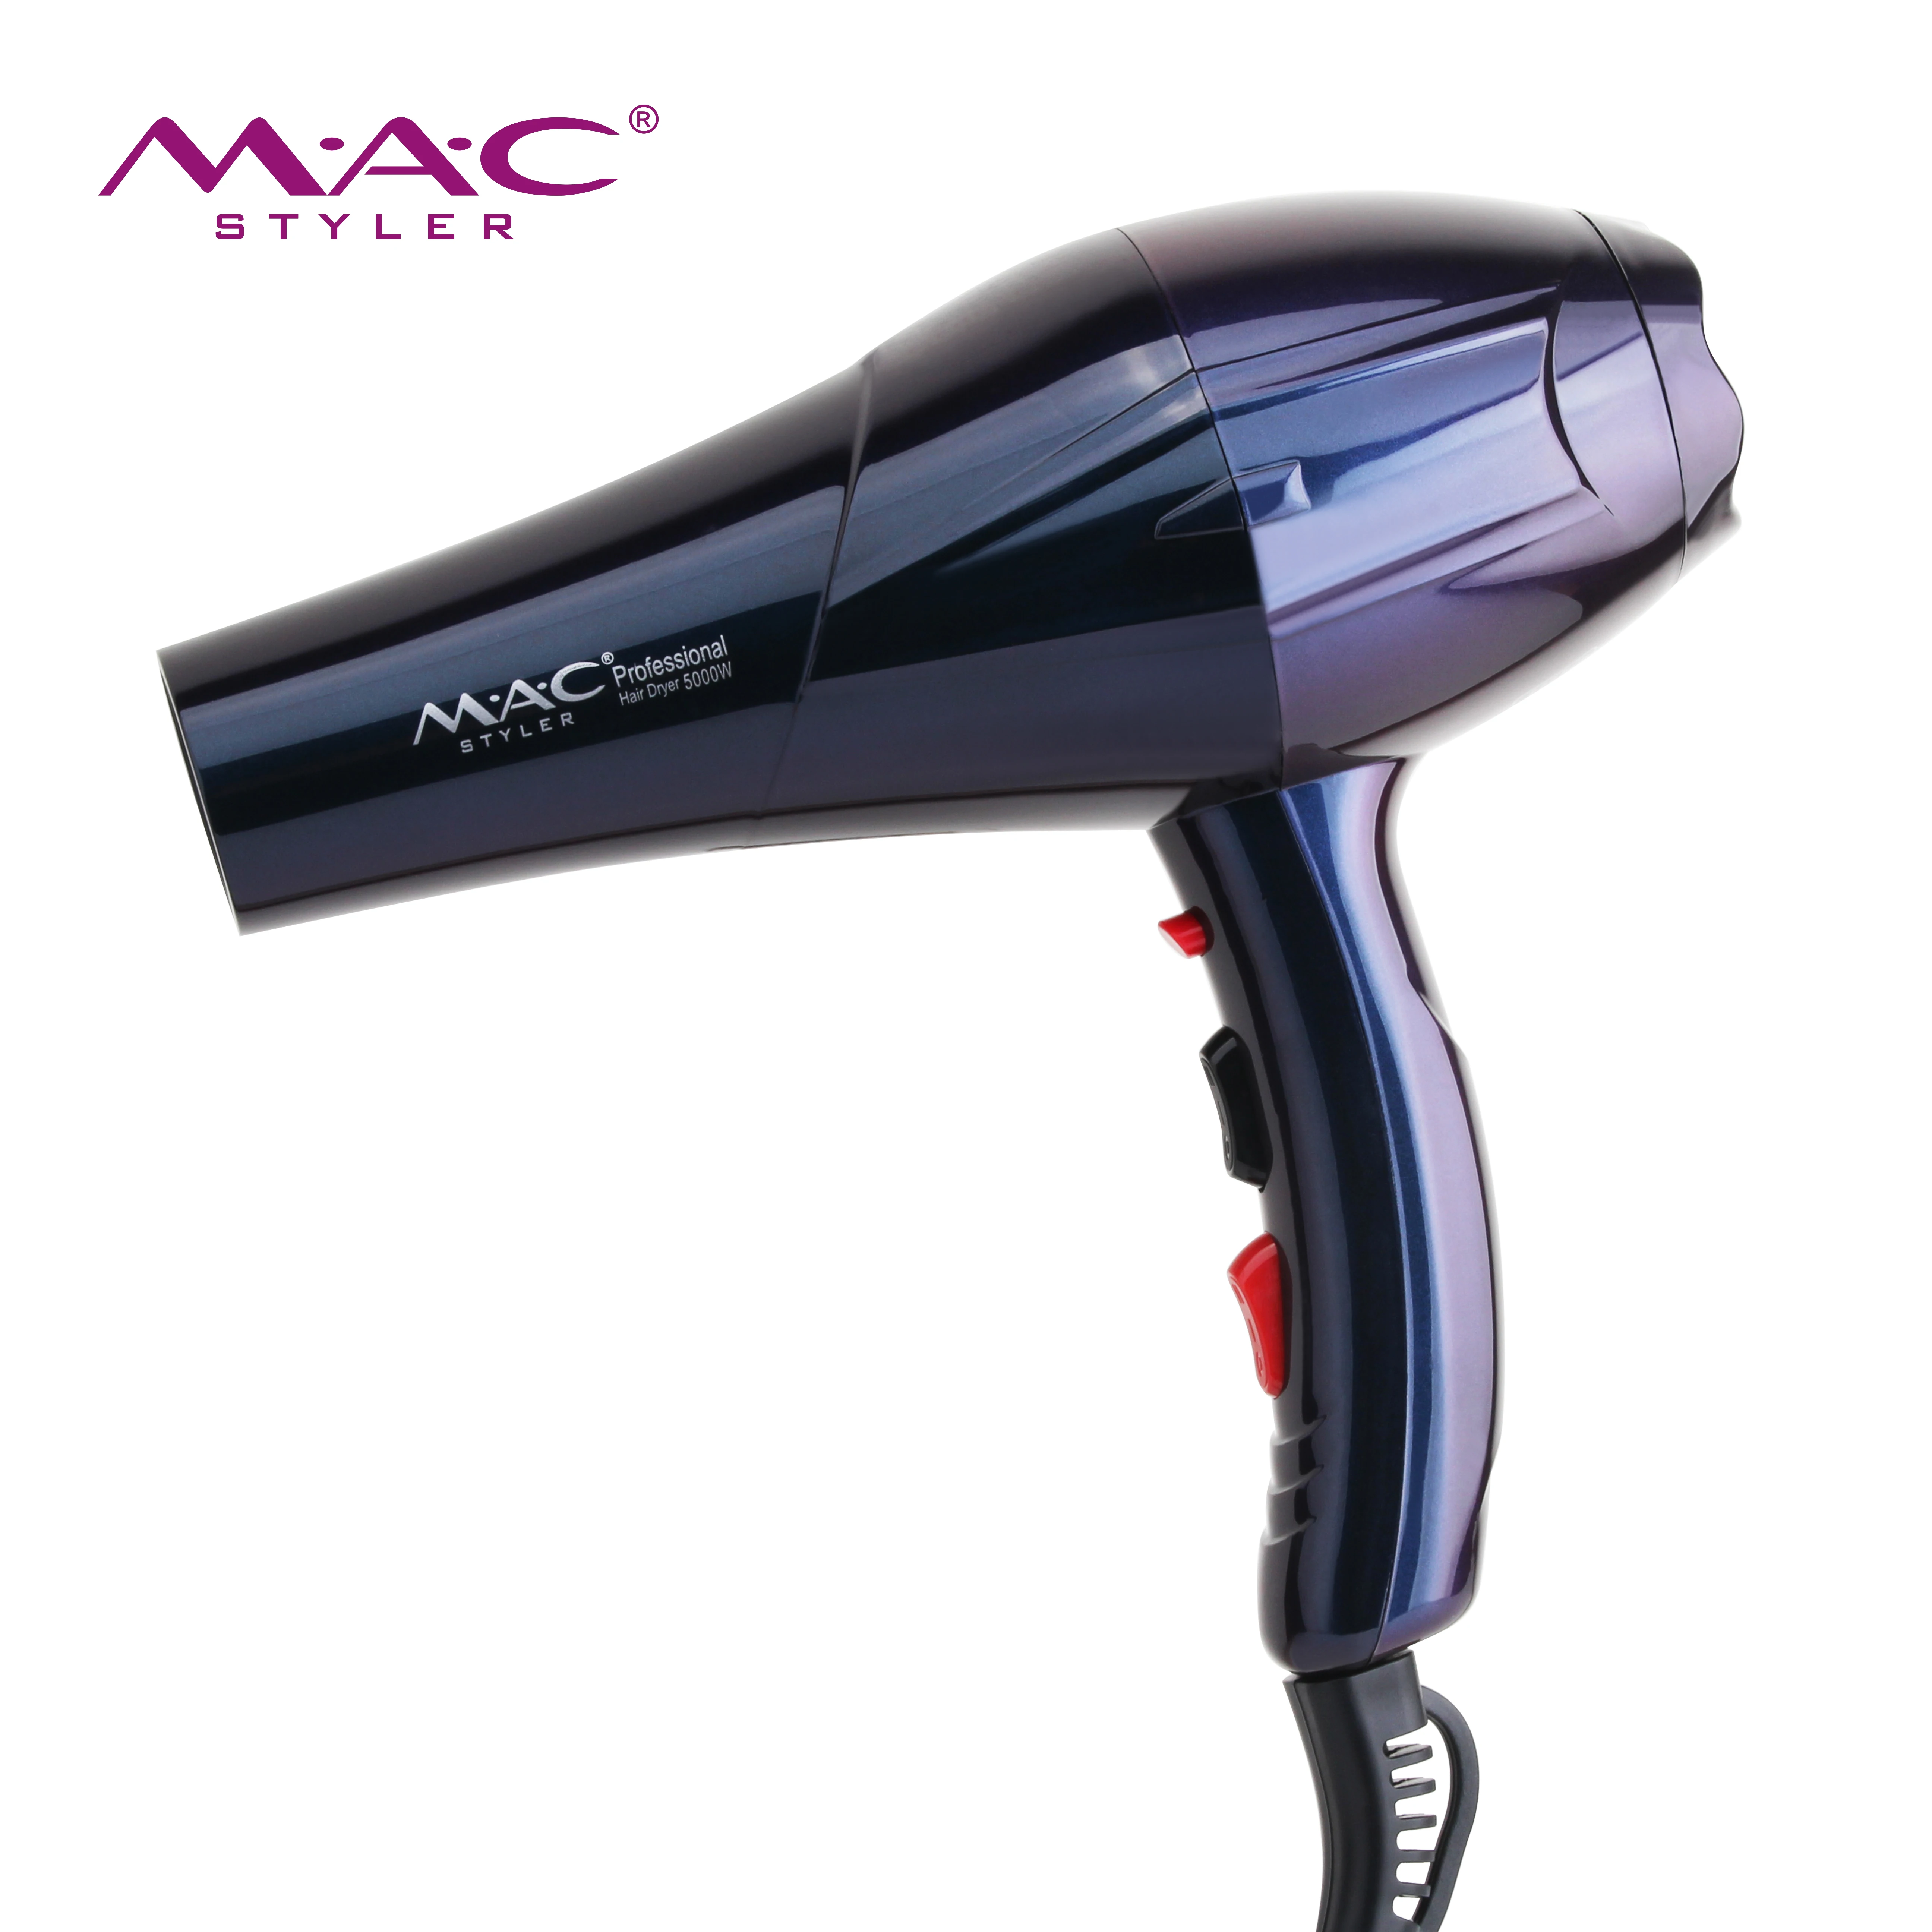 

New Design Super sonic Professional Salon private label Hair Blow dryer AC Motor Manufacturer 2200W Powerful Hair Dryer